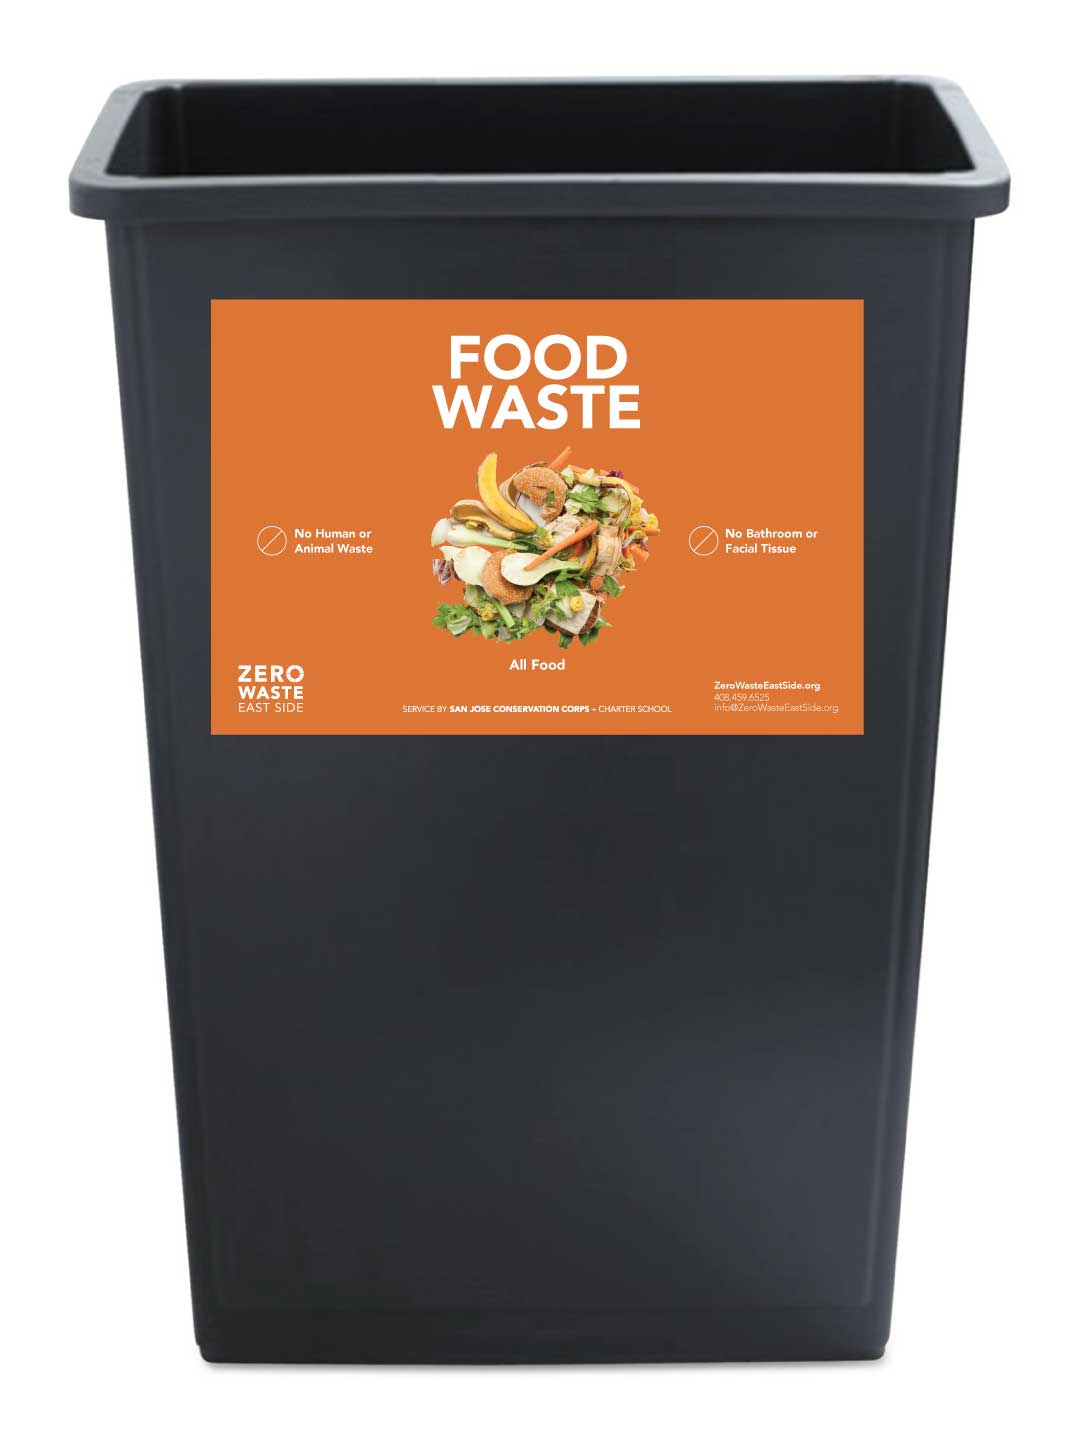 Receptacle Label for Food Waste